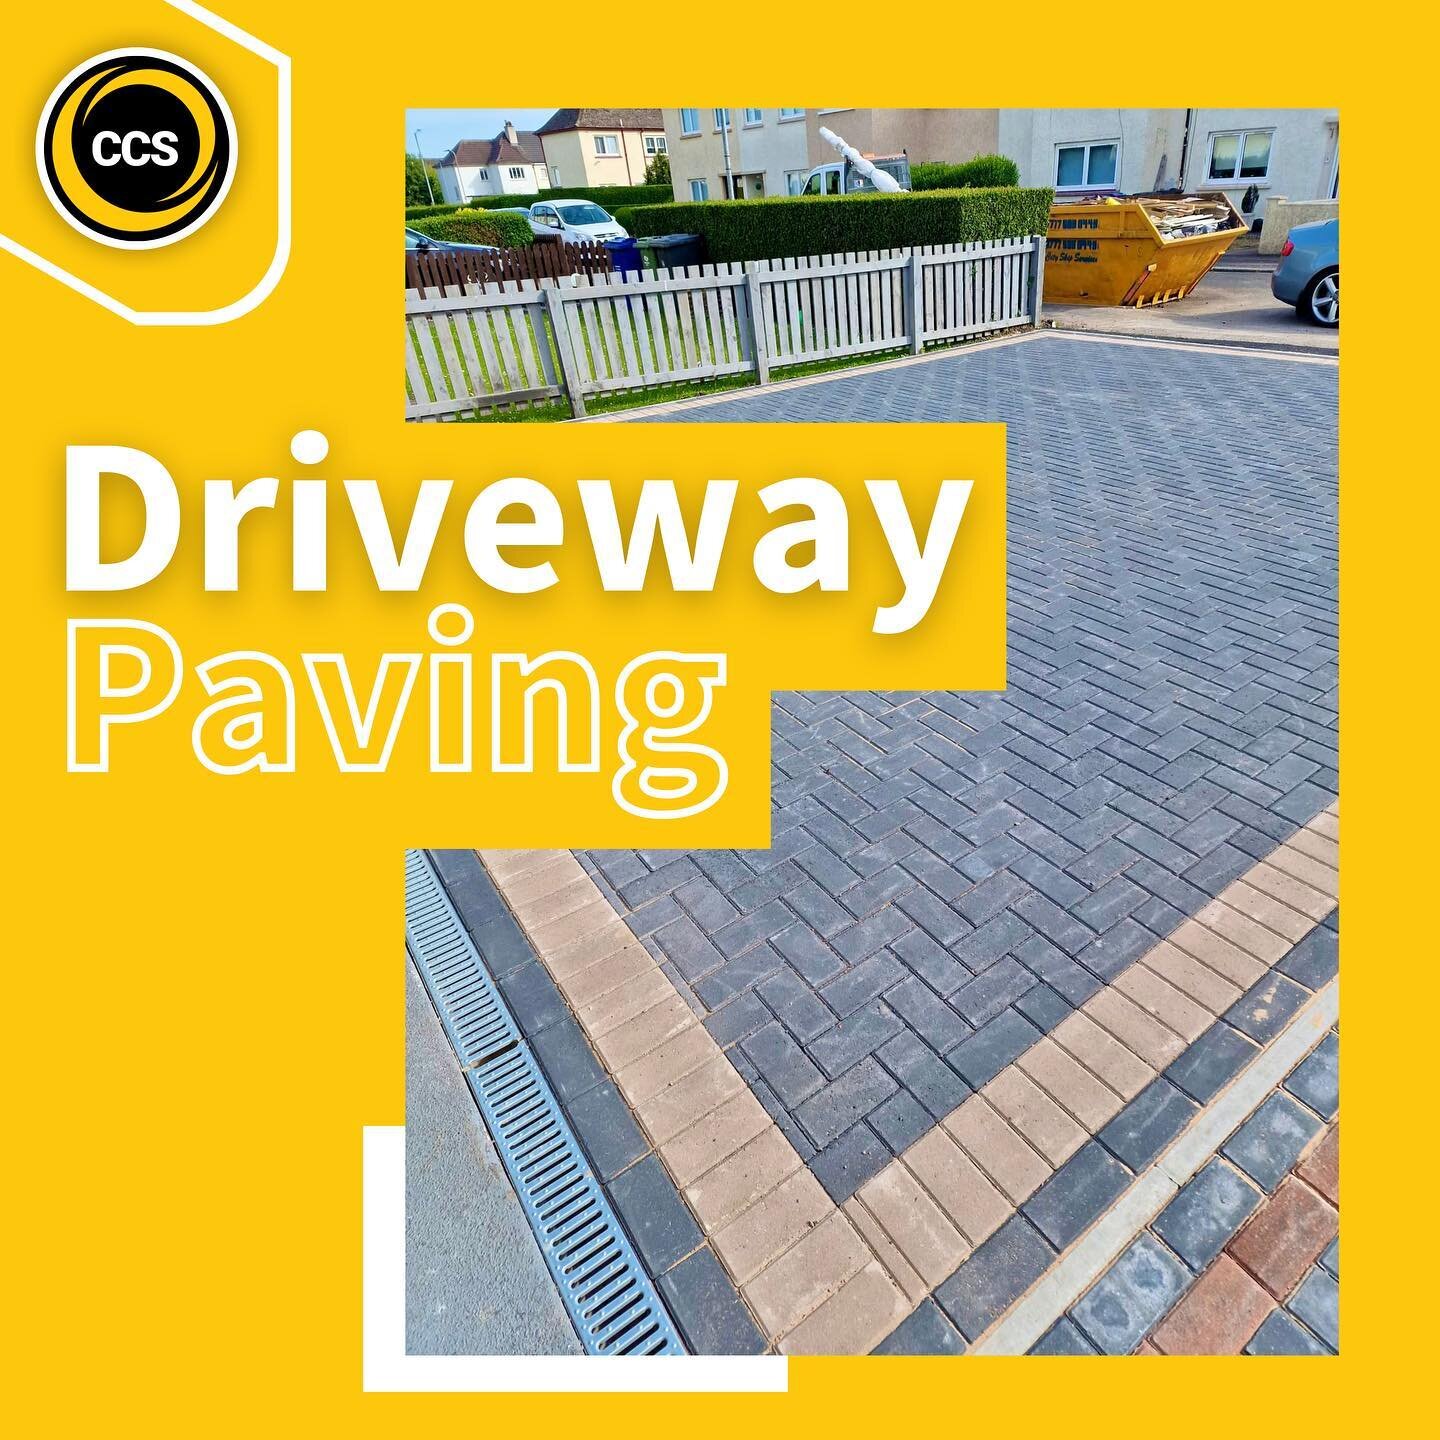 Pave your driveway with Candid Construction Scotland! 🏡 🧱 

Whether upgrading the surface of your existing driveway space, or creating a brand new paved area for your home! Get in touch for more information from our team. ✅

candidconstructionscotl